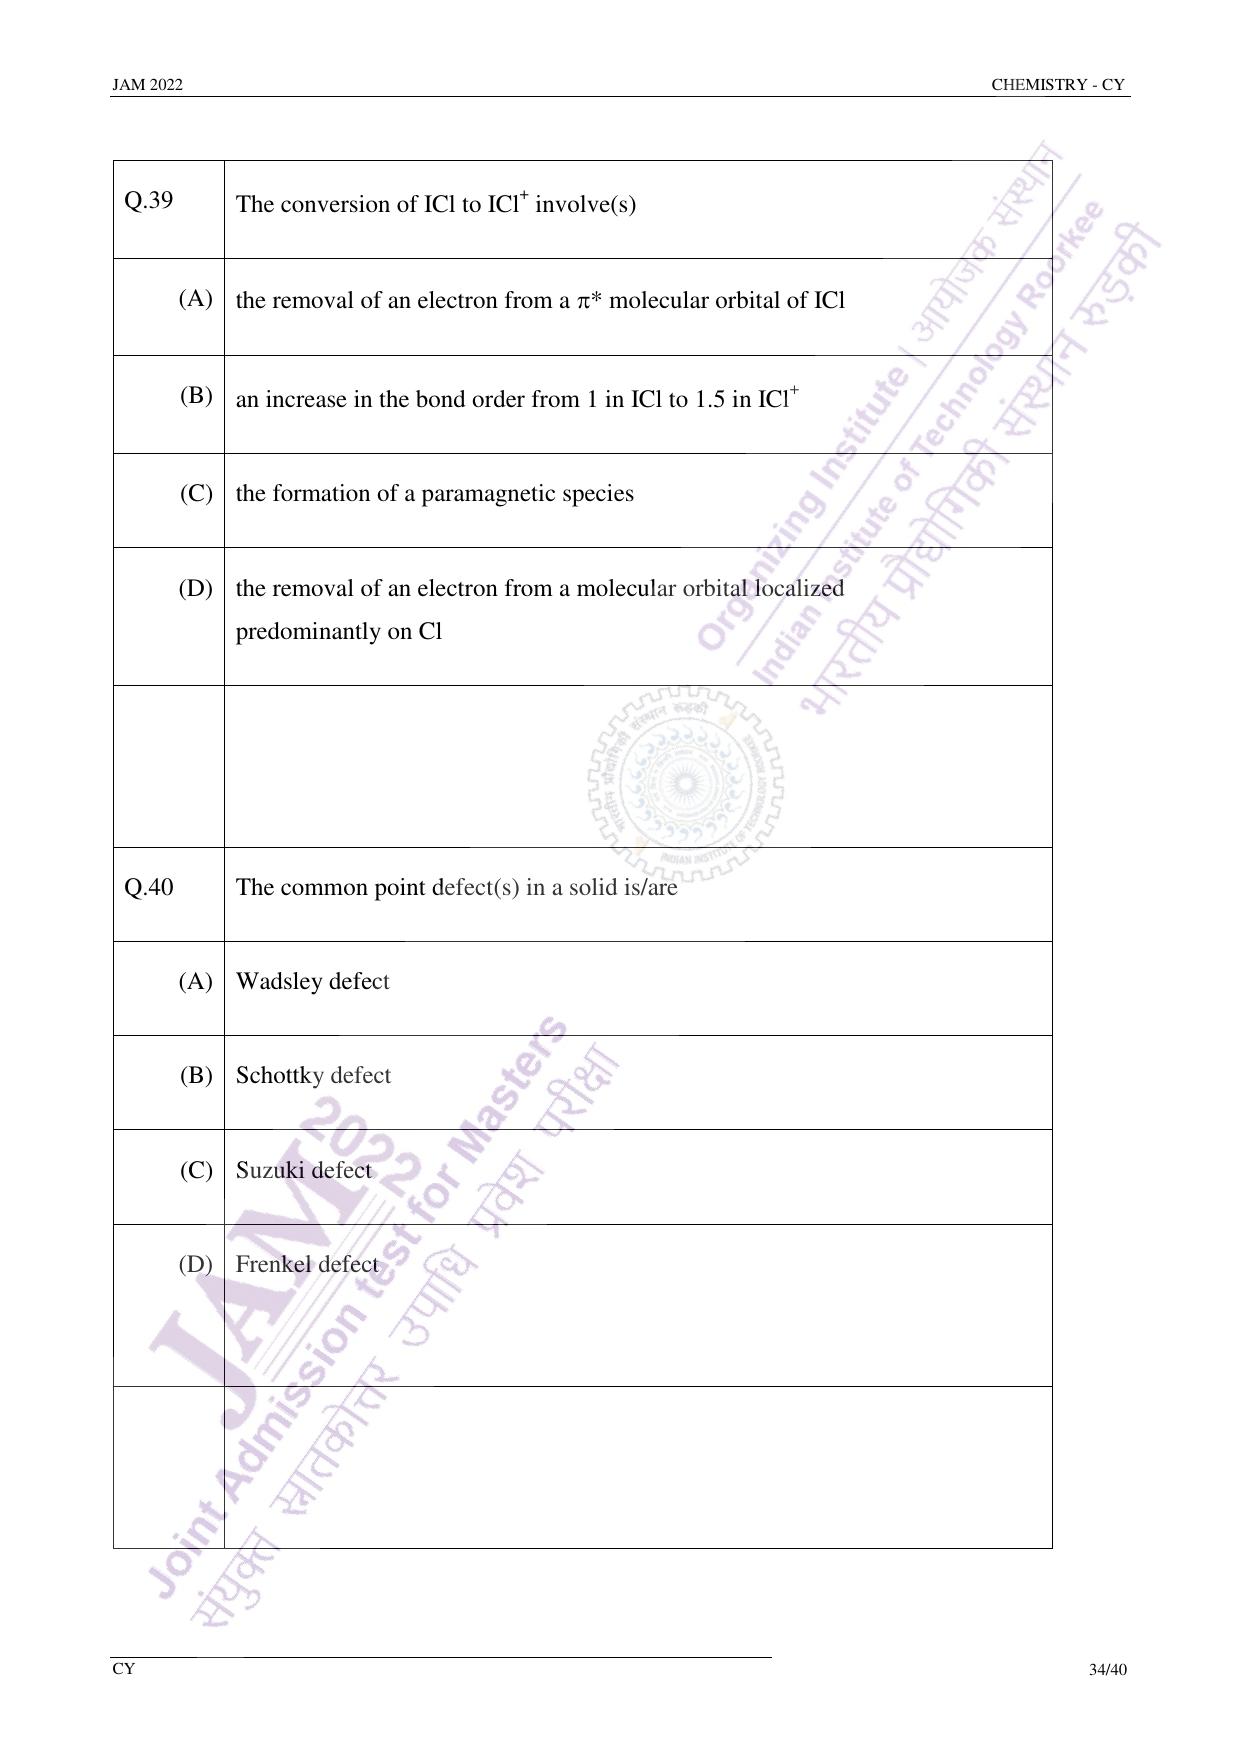 JAM 2022: CY Question Paper - Page 33